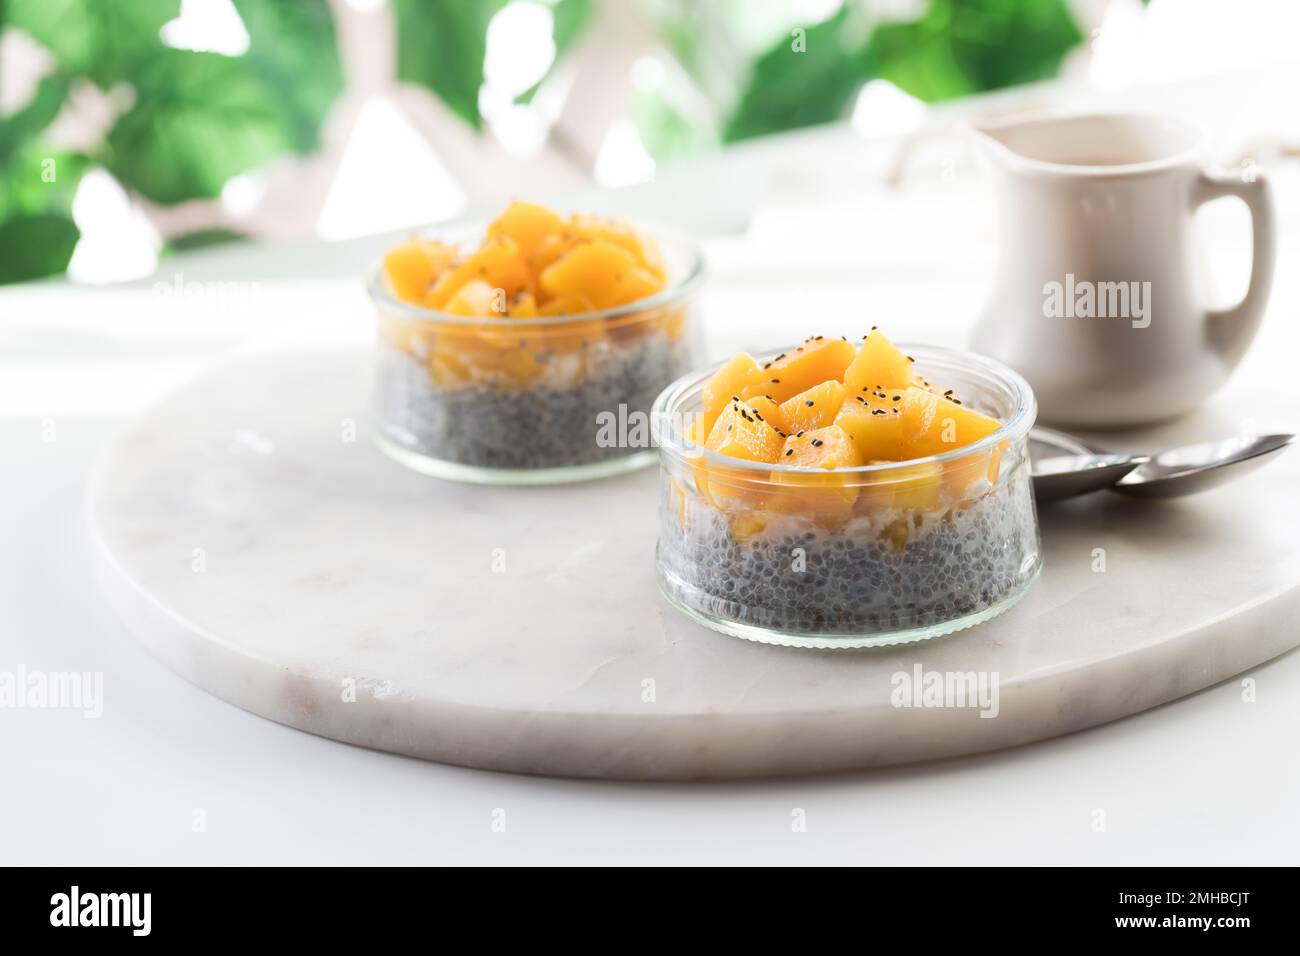 Chia pudding snacks topped with chopped mango against a burry background. Stock Photo